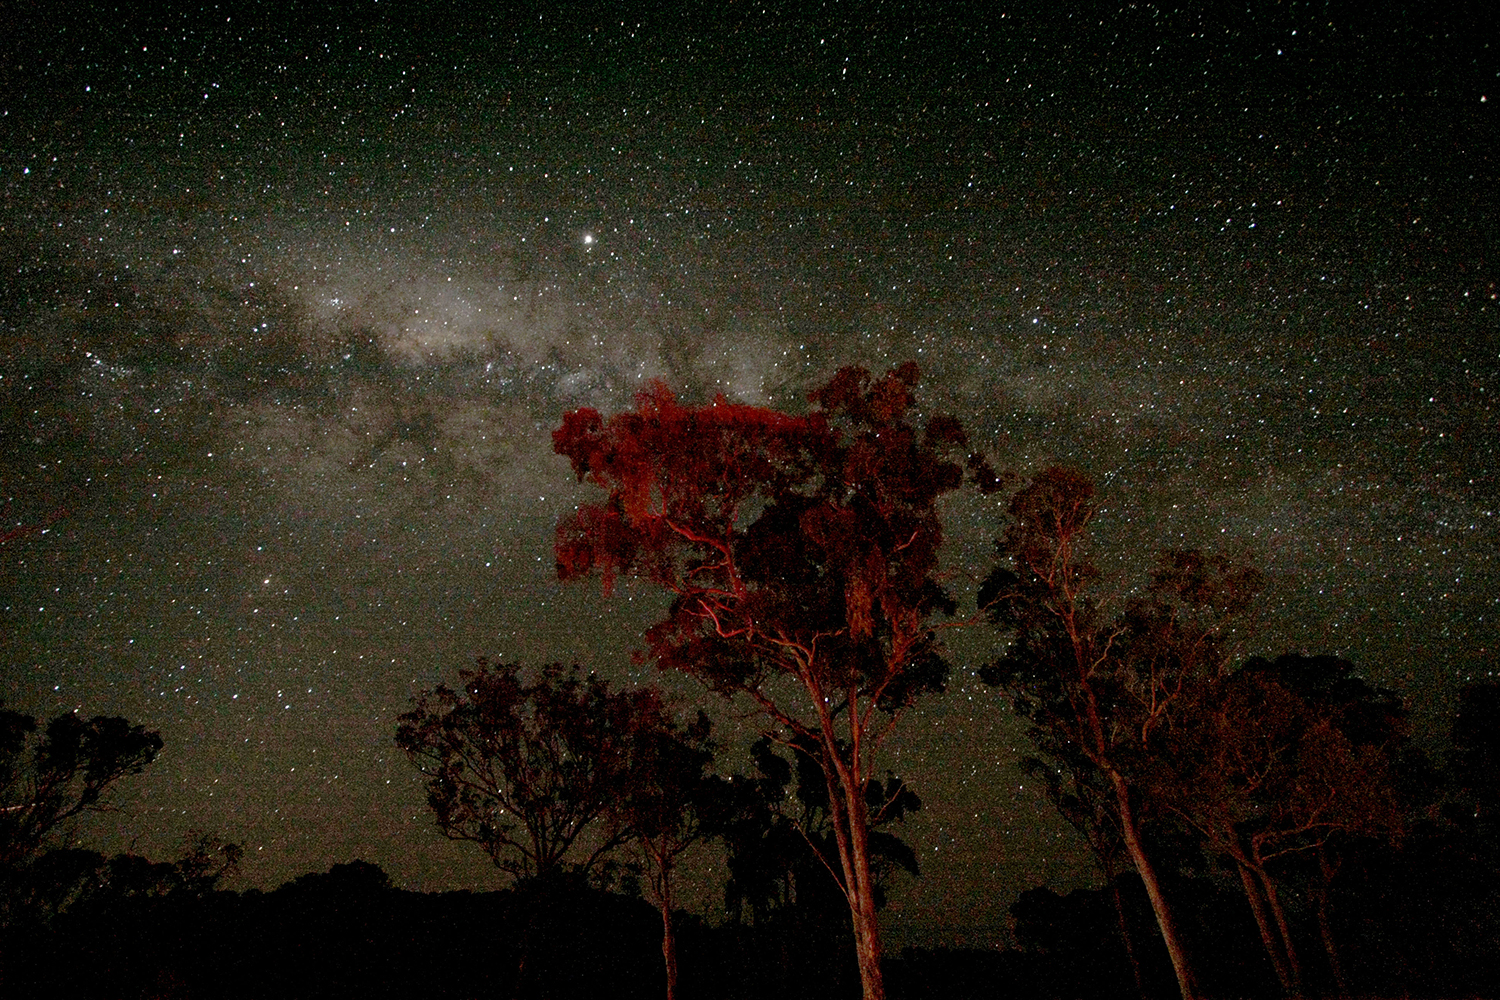 Want to crane your neck at the Milky Way? In remote parts of New South Wales, you won't even need a telescope. Image by Paco Alcantara / Moment / Getty Images